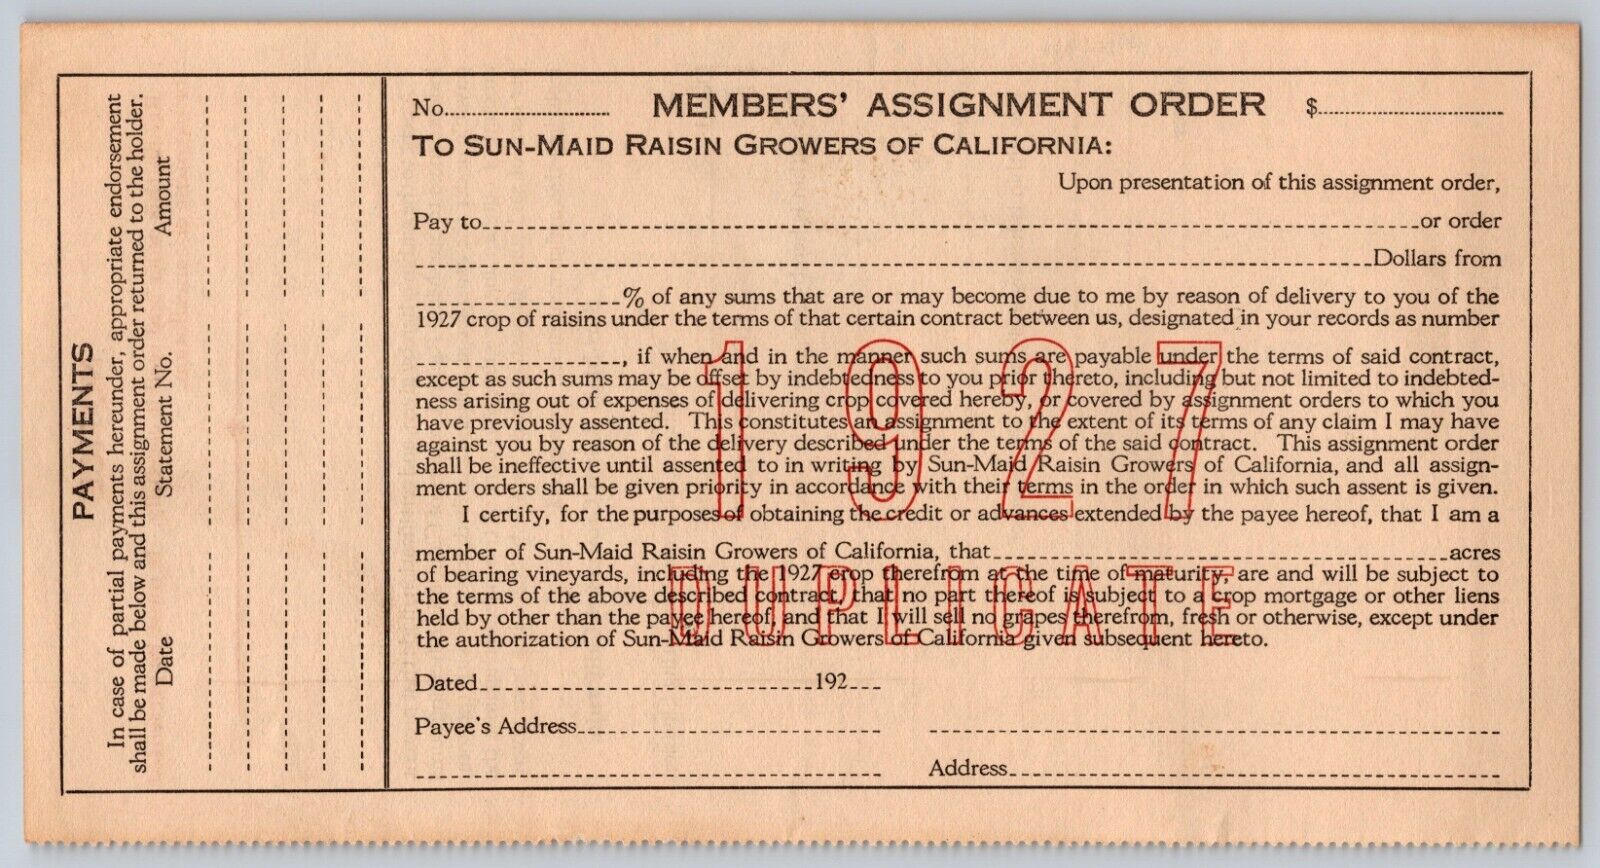 1927 contract between California Raisins and farmers Historical document